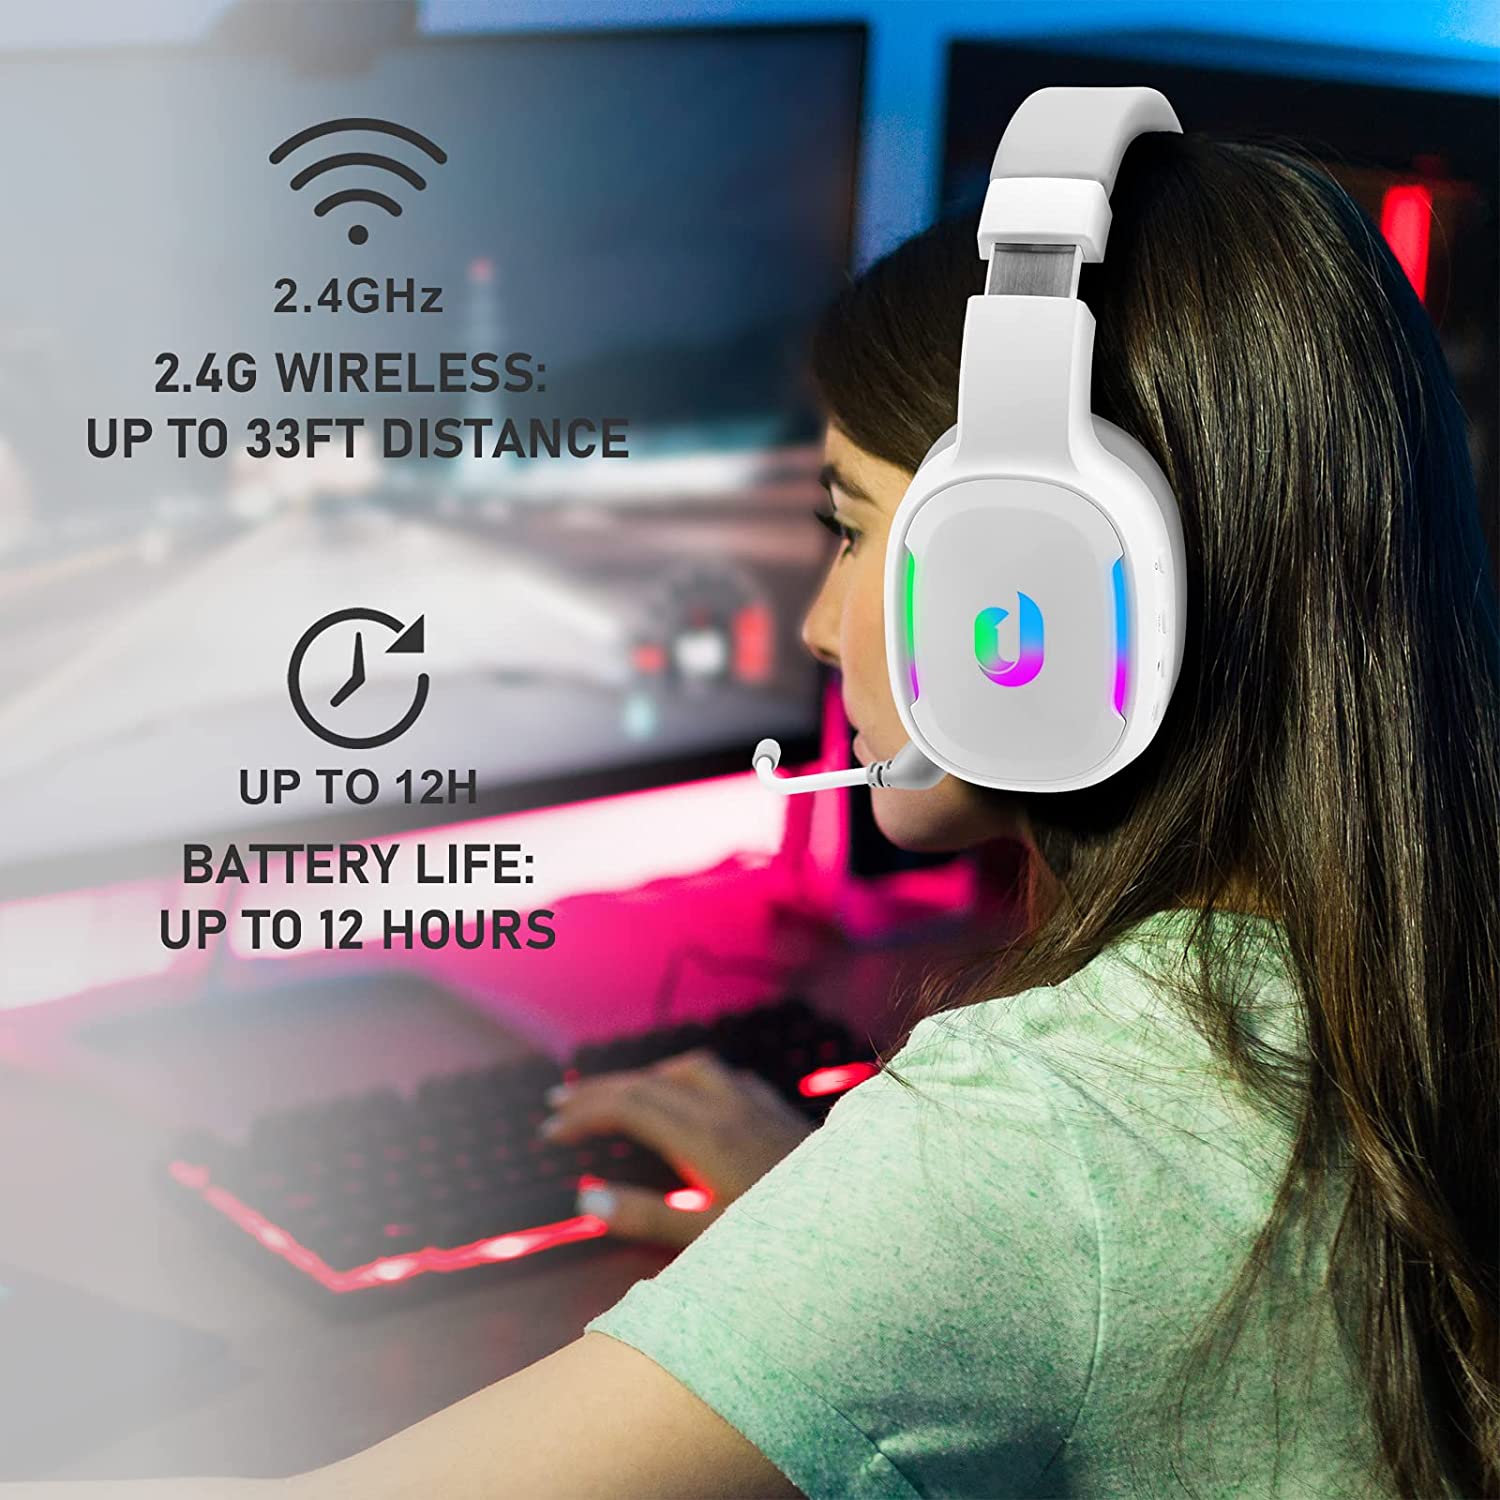 Jeecoo G80 Wireless Gaming Headset - 7.1 Surround Sound, Detachable Noise Canceling Mic, Low Latency 2.4GHz Wireless Gaming Headphones, Shining RGB - Works with PS4 PS5 PC Laptop Computers